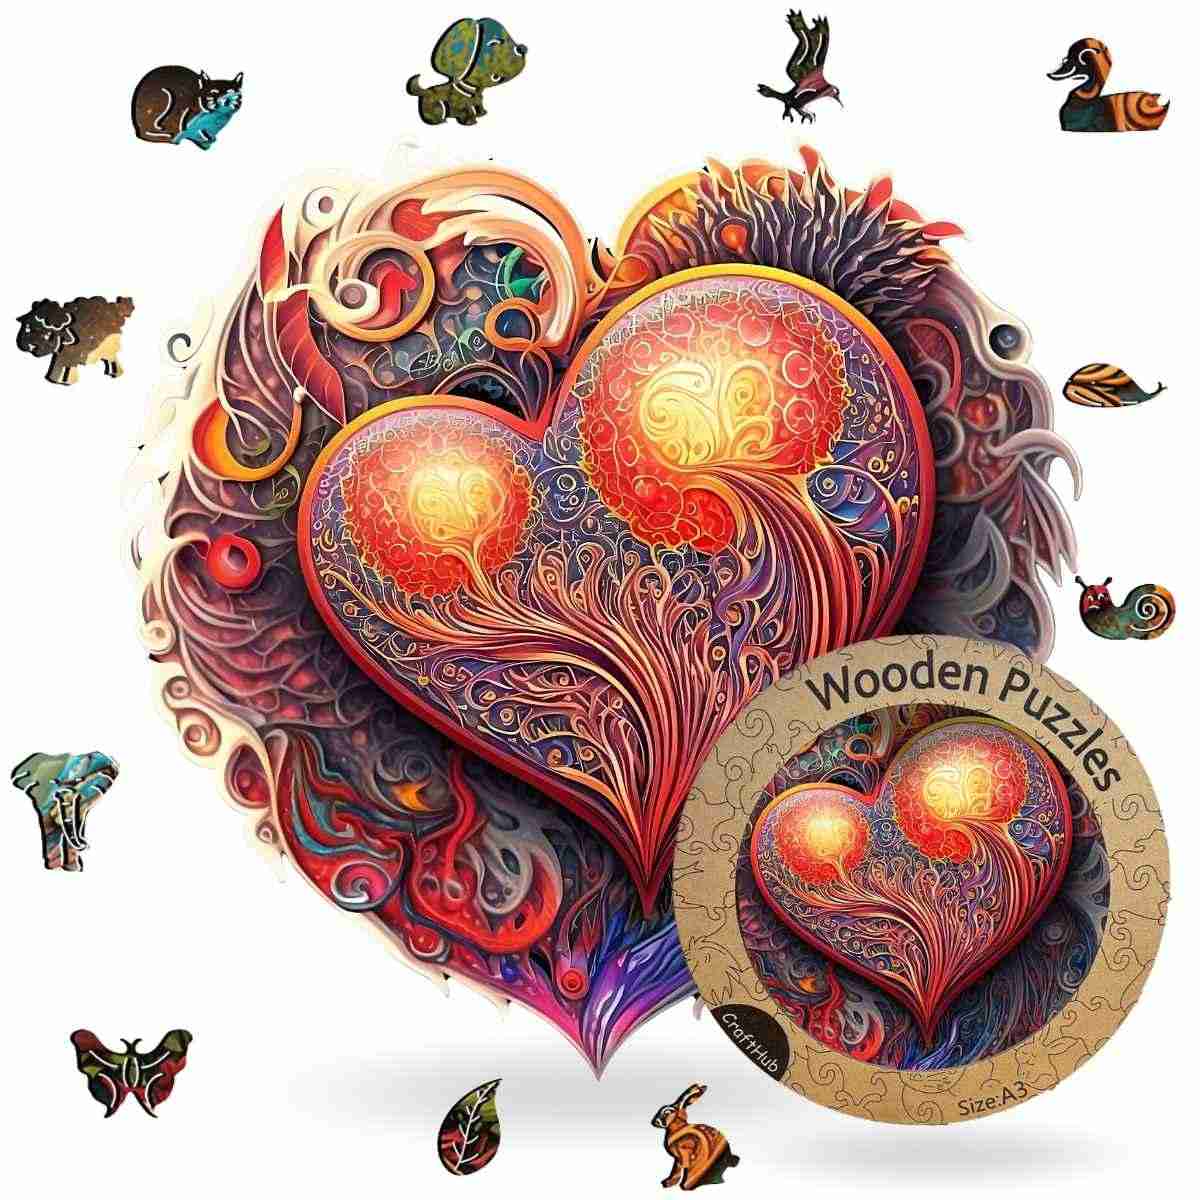 Animal Jigsaw Puzzle > Wooden Jigsaw Puzzle > Jigsaw Puzzle A3+Wooden Box Blossom Heart - Jigsaw Puzzle